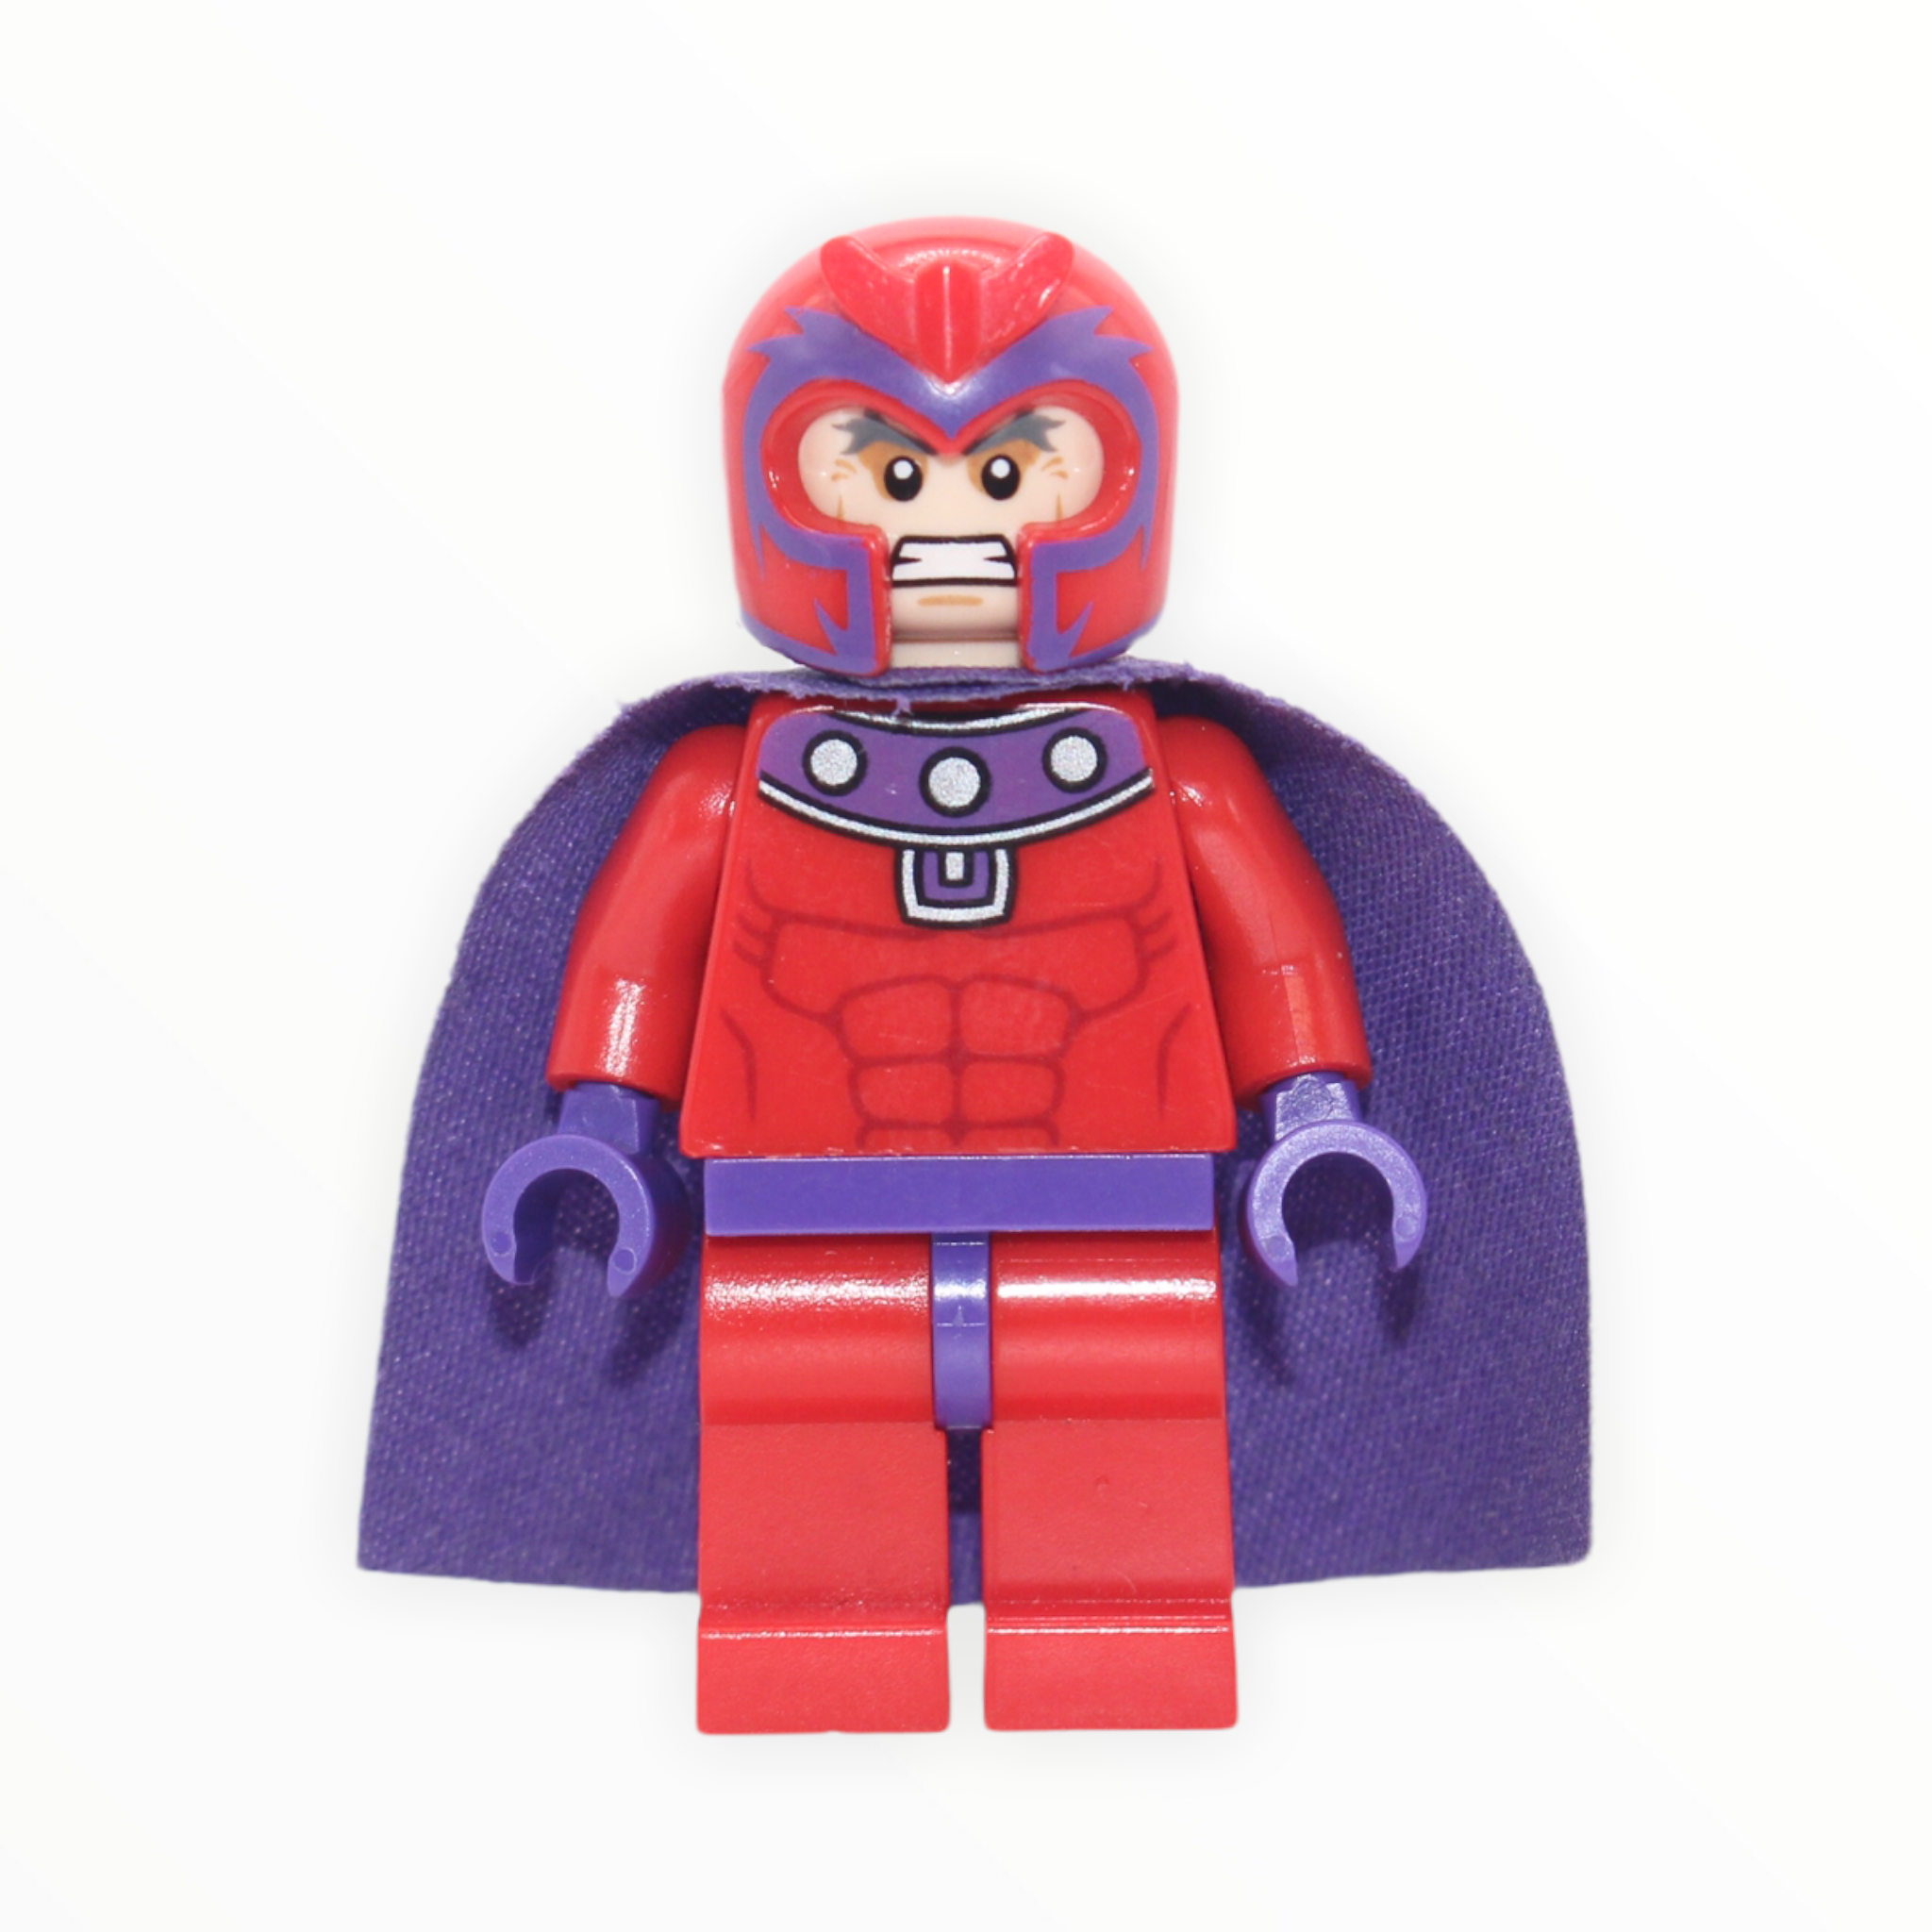 Magneto (red outfit, helmet)